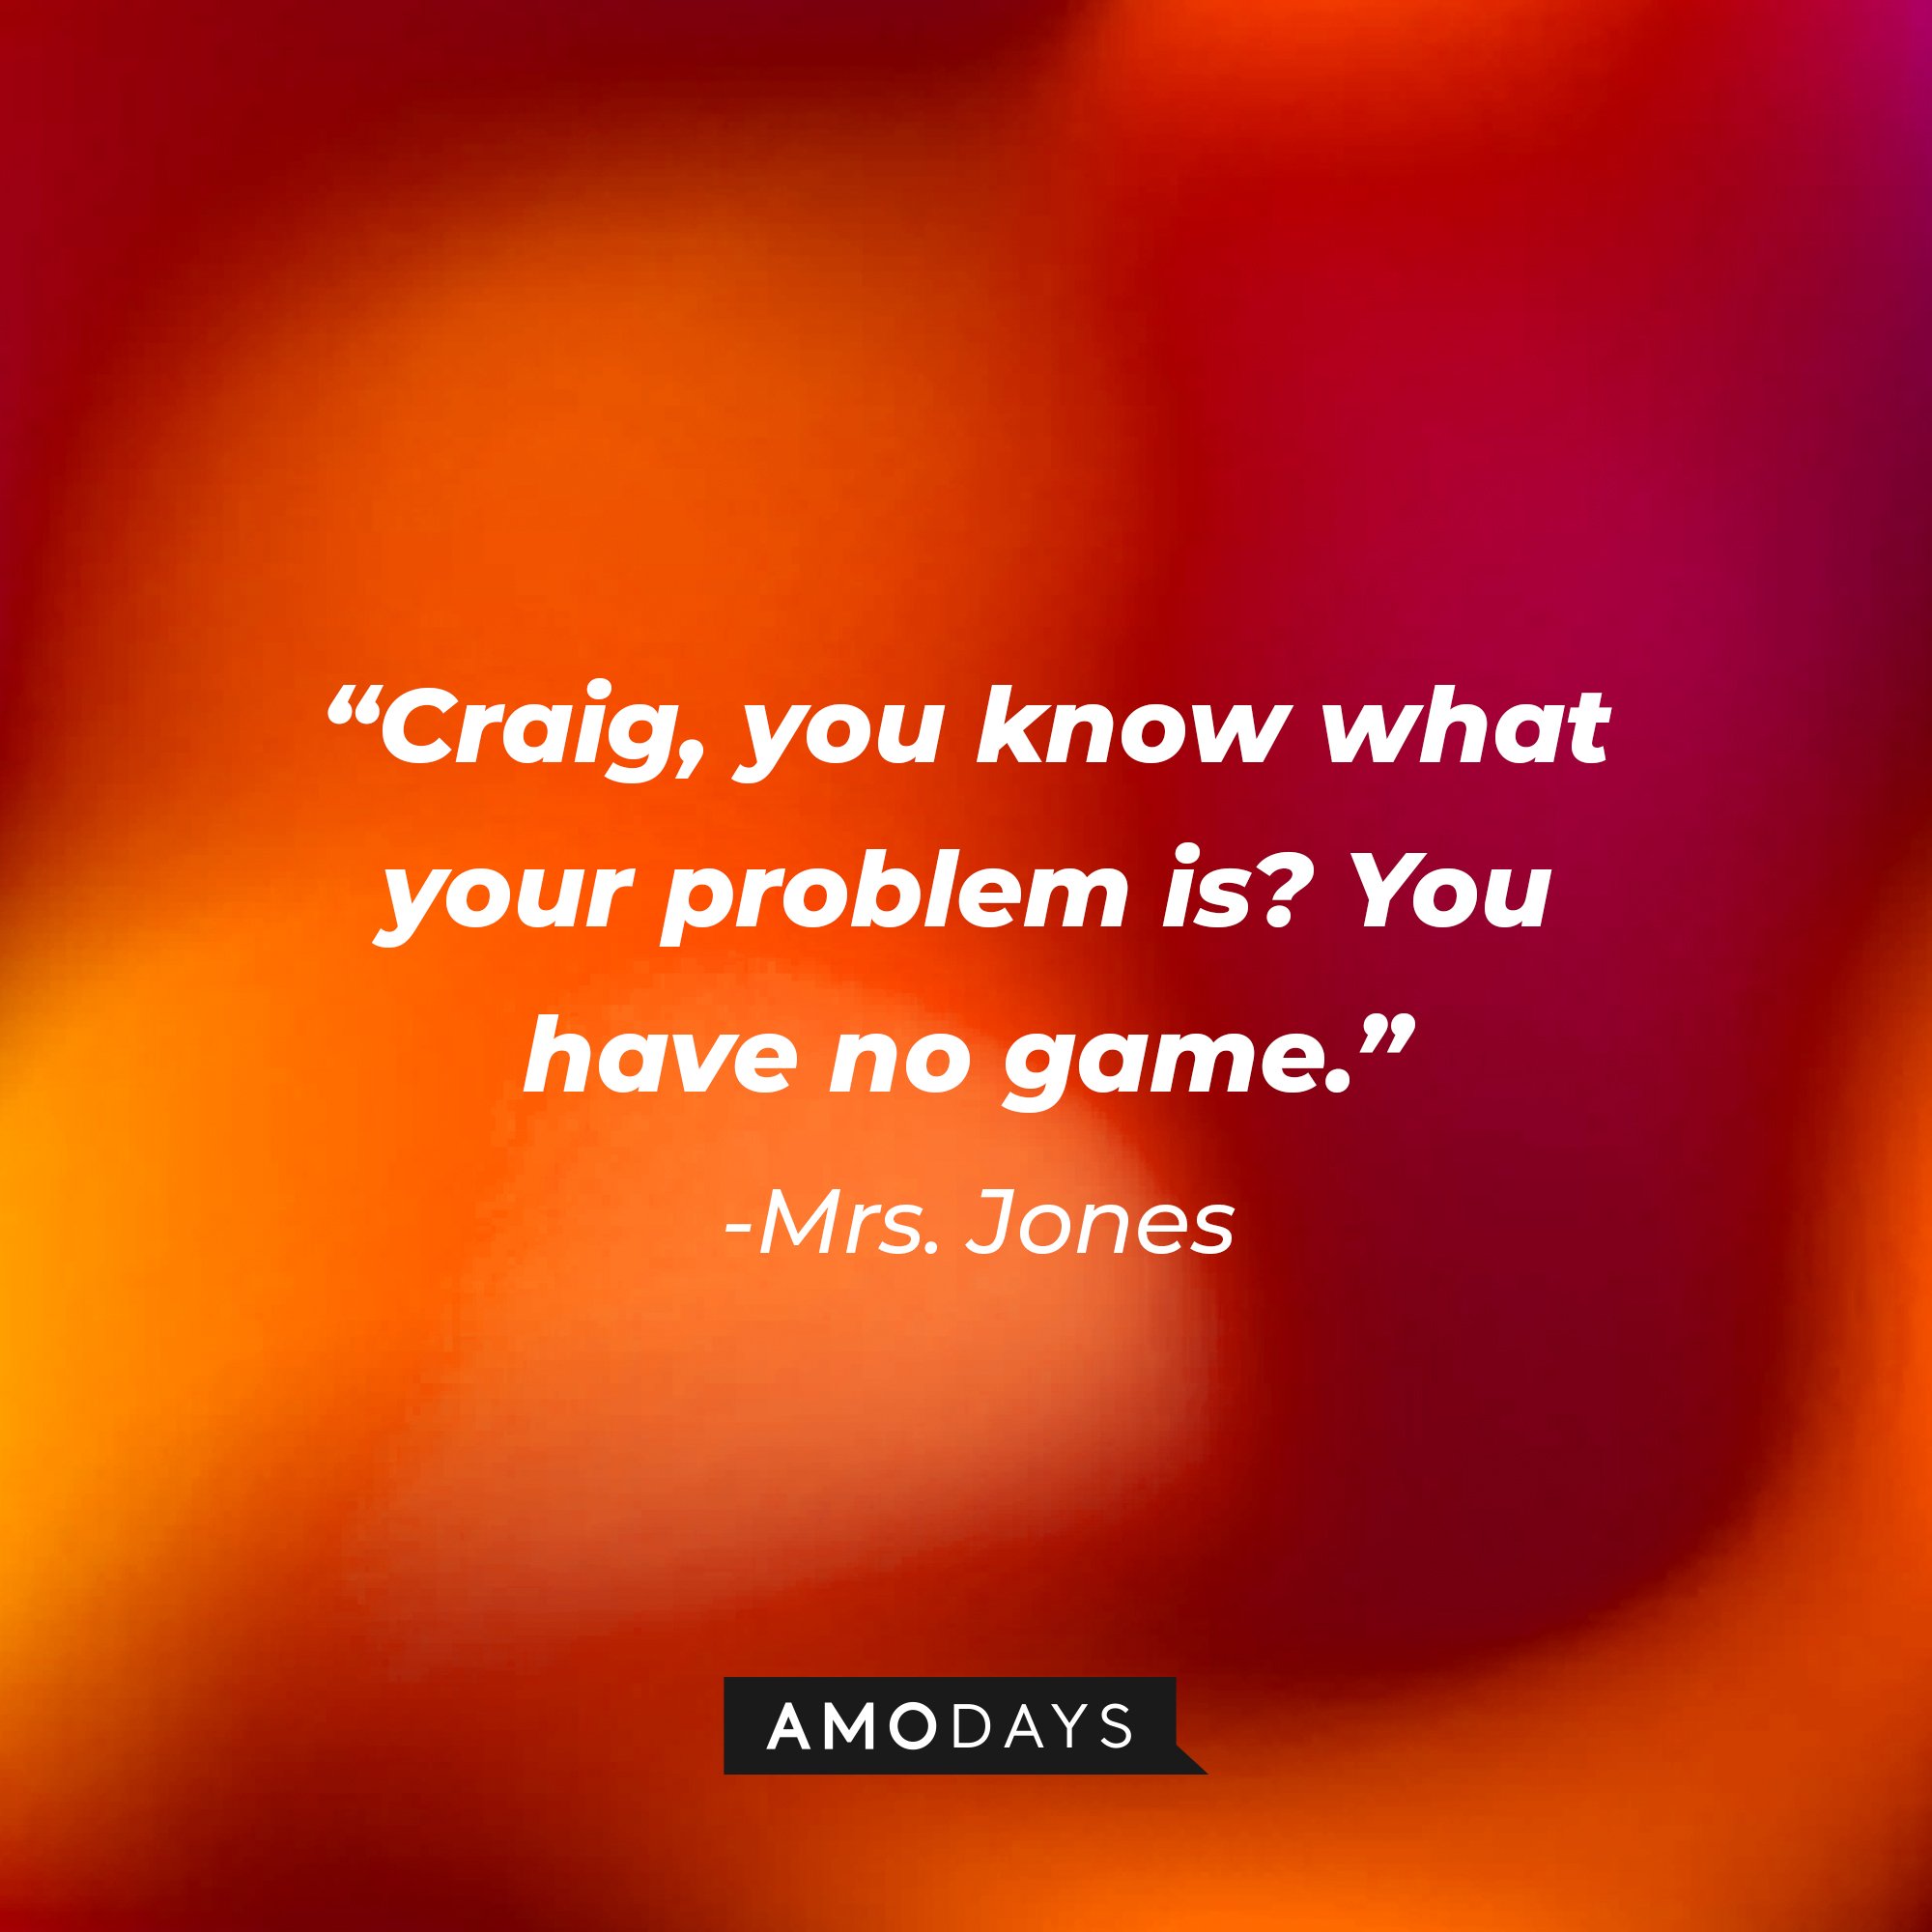  Mrs. Jones’ quote: "Craig, you know what your problem is? You have no game." | Image: AmoDays